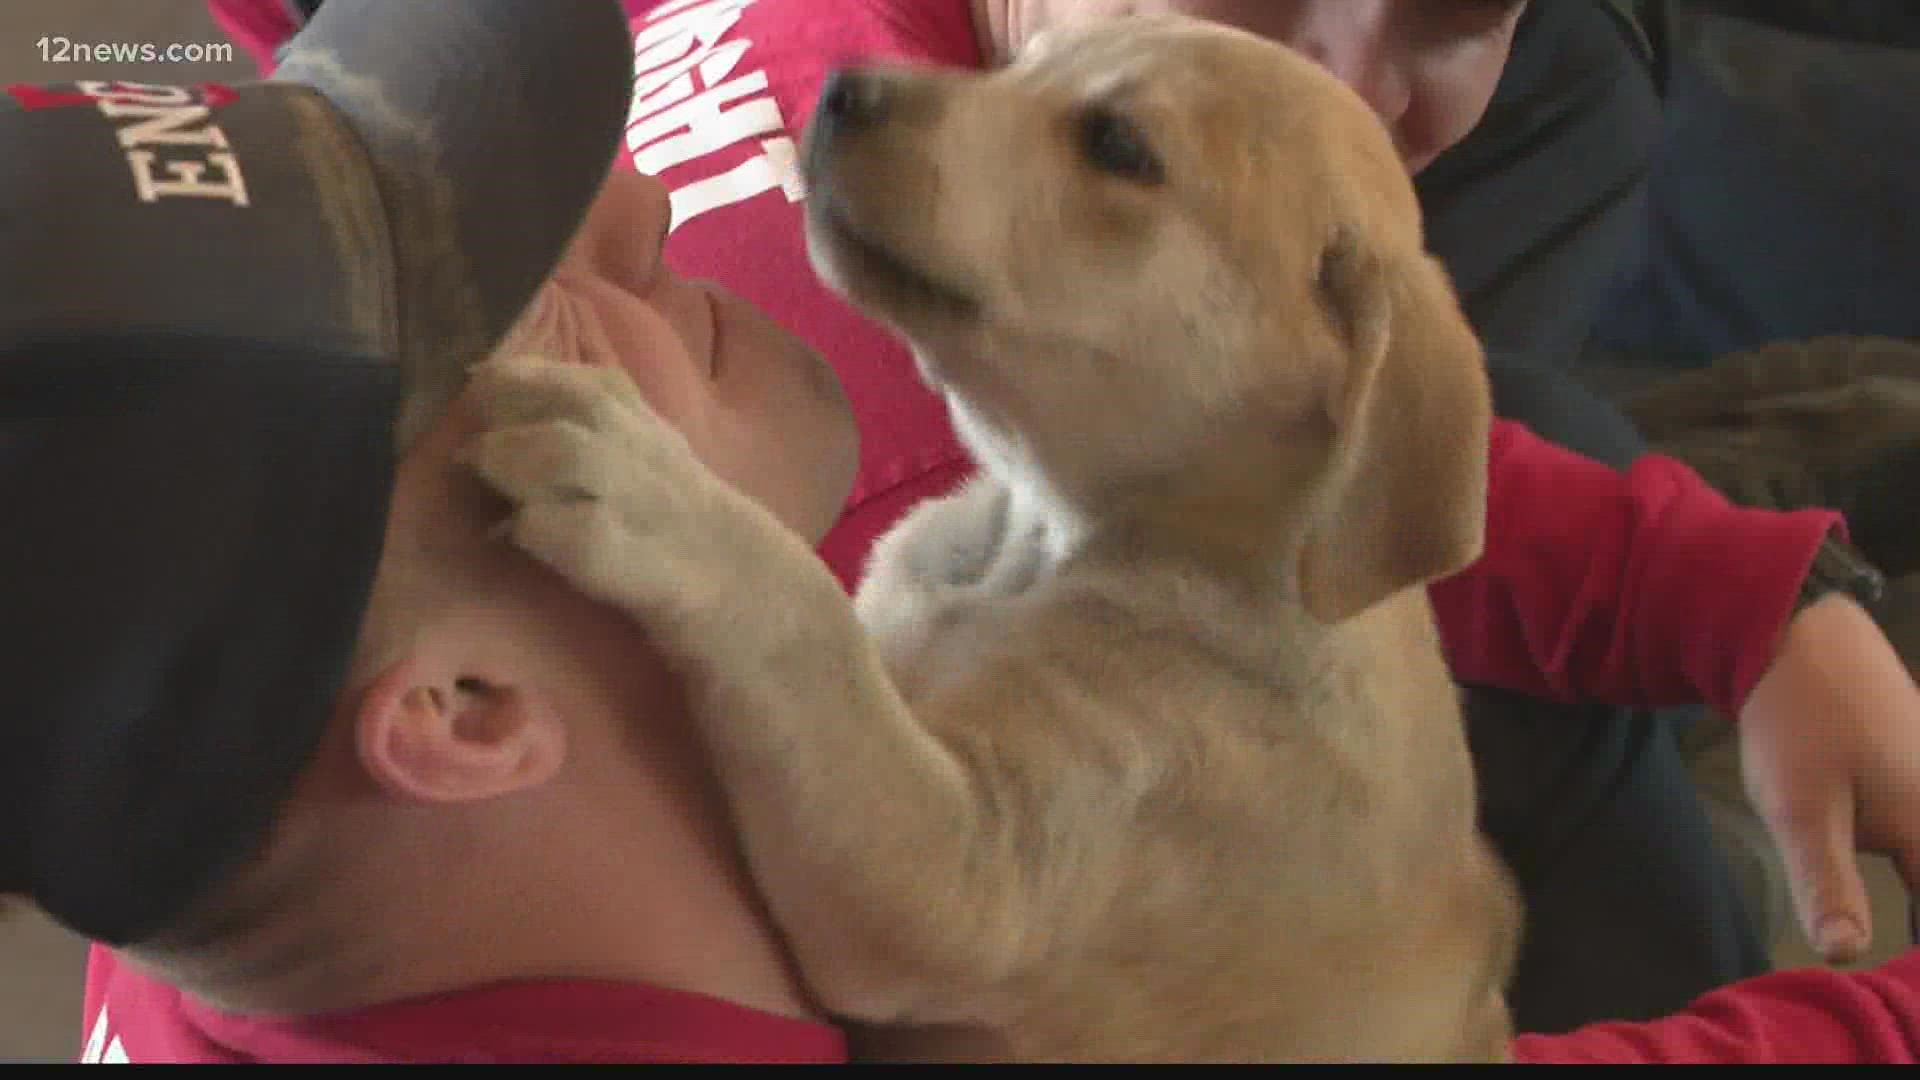 Learning to fight fires and save lives can be stressful. Recruits going through training in Glendale got a break from the pressure thanks to some puppy love.